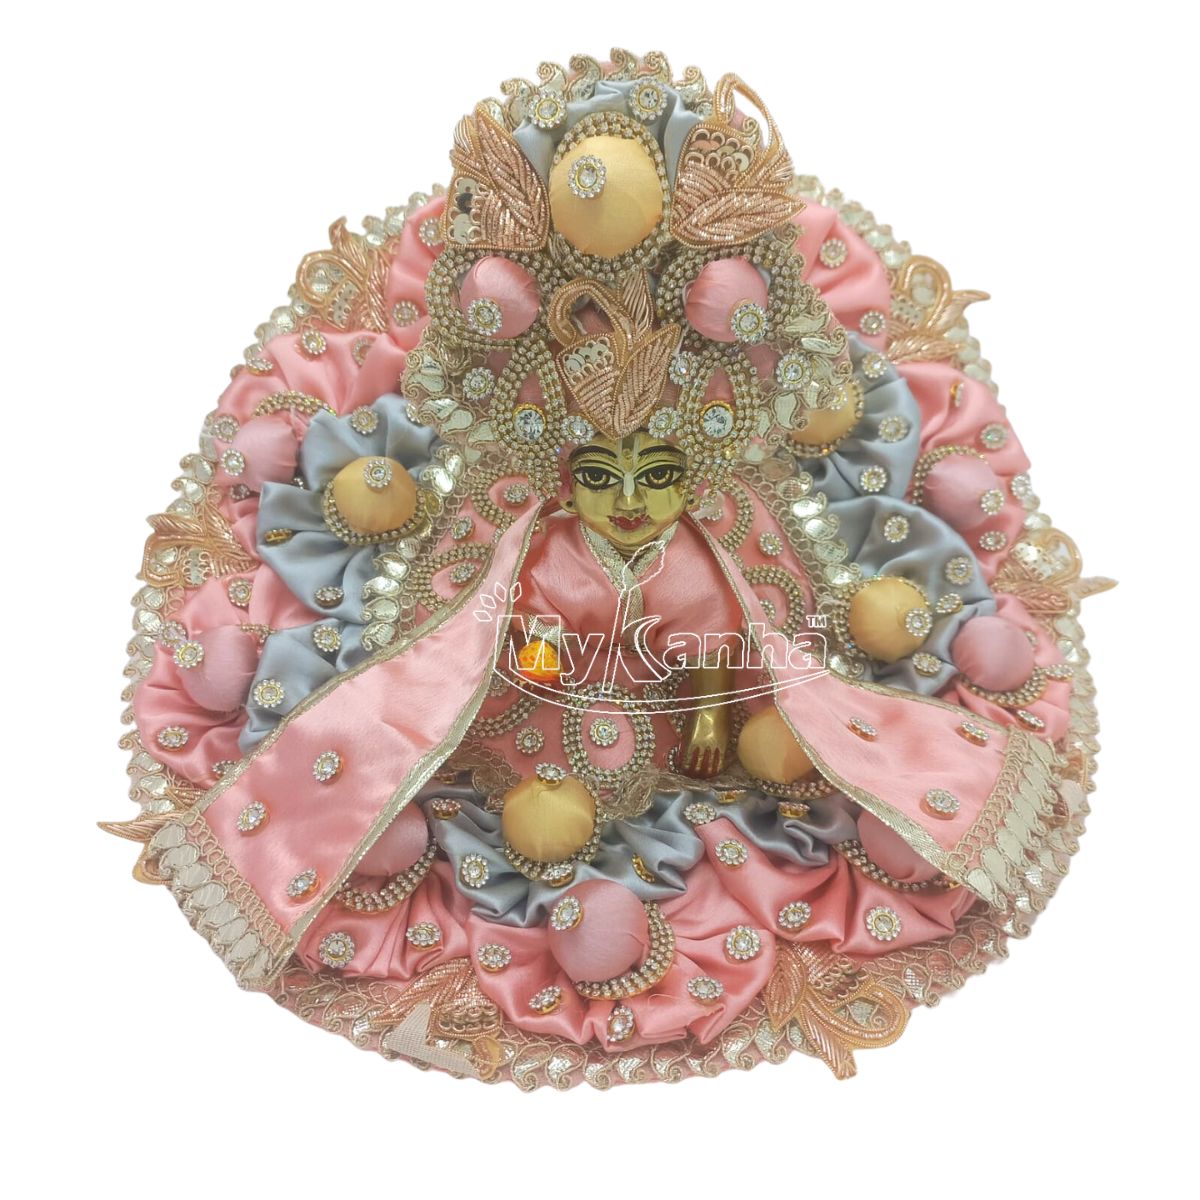 Buy Generic Pack of 1 Pcs Laddu Gopal Dress with Jewelry Set and Saafa for  Lord Shri Krishna, Laddu Gopal Poshak #Laddugopal833(3 Number) Online at  Low Prices in India - Amazon.in